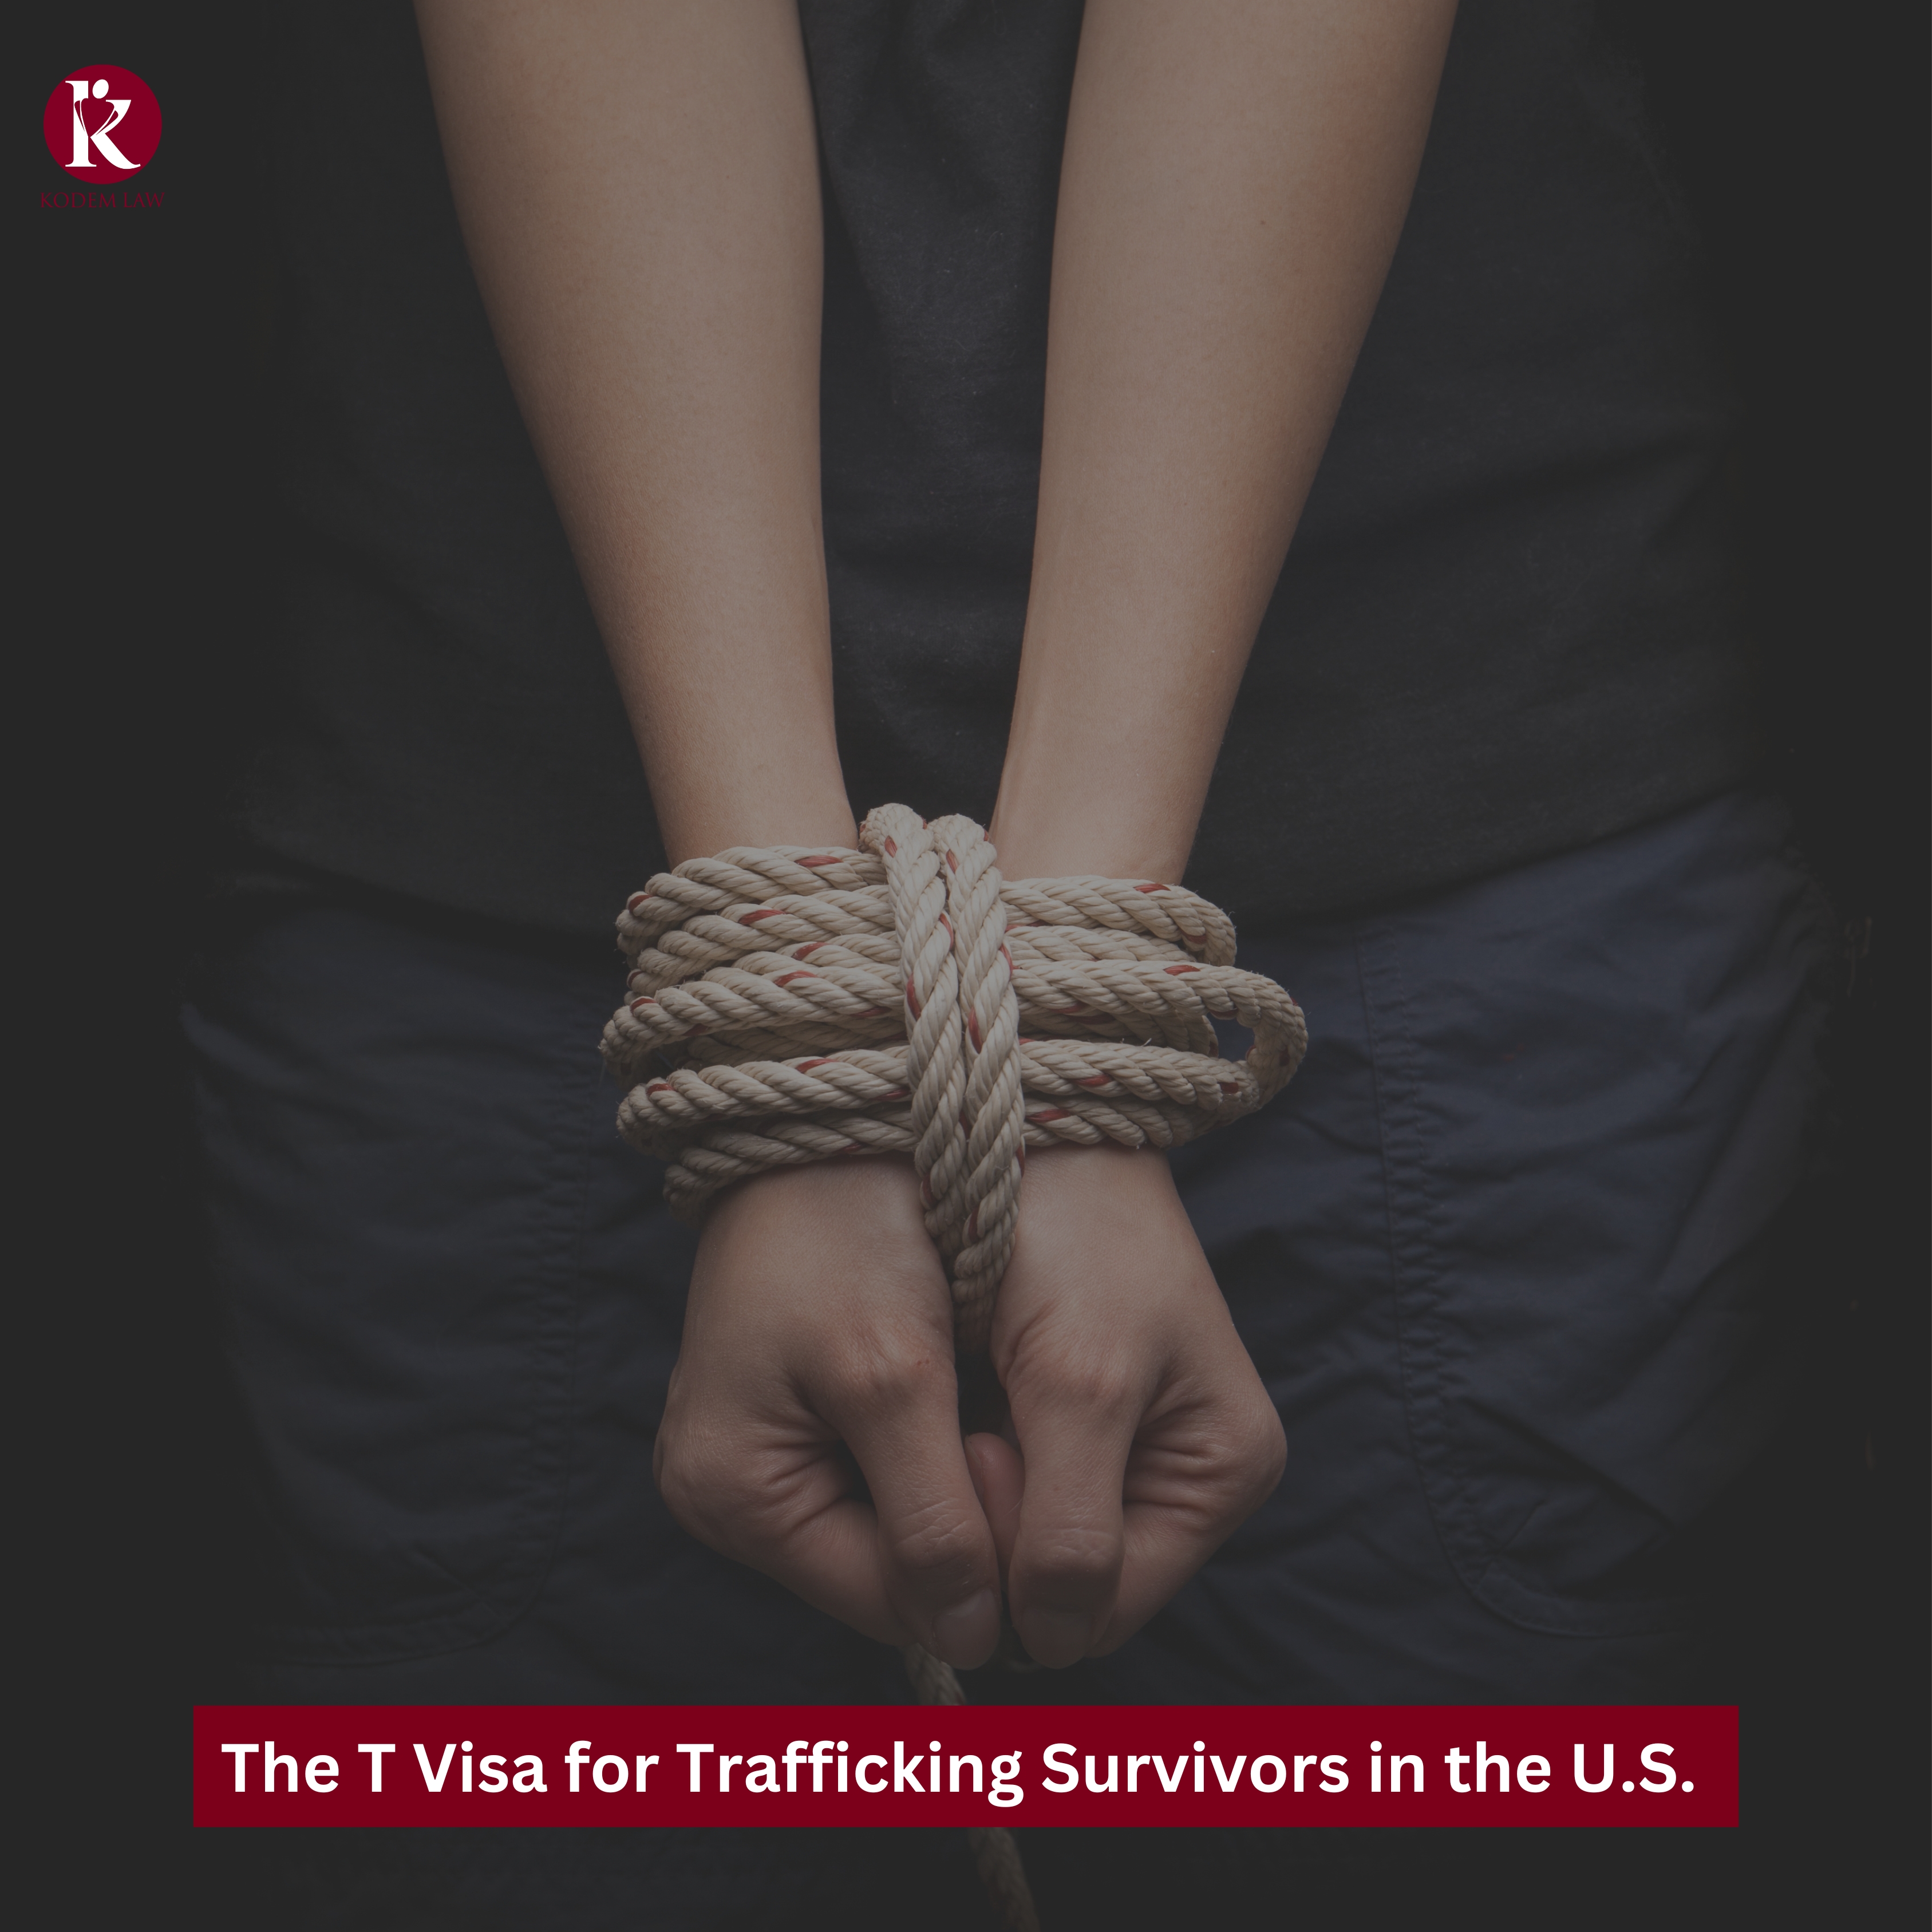 The T Visa for Trafficking Survivors in the U.S.